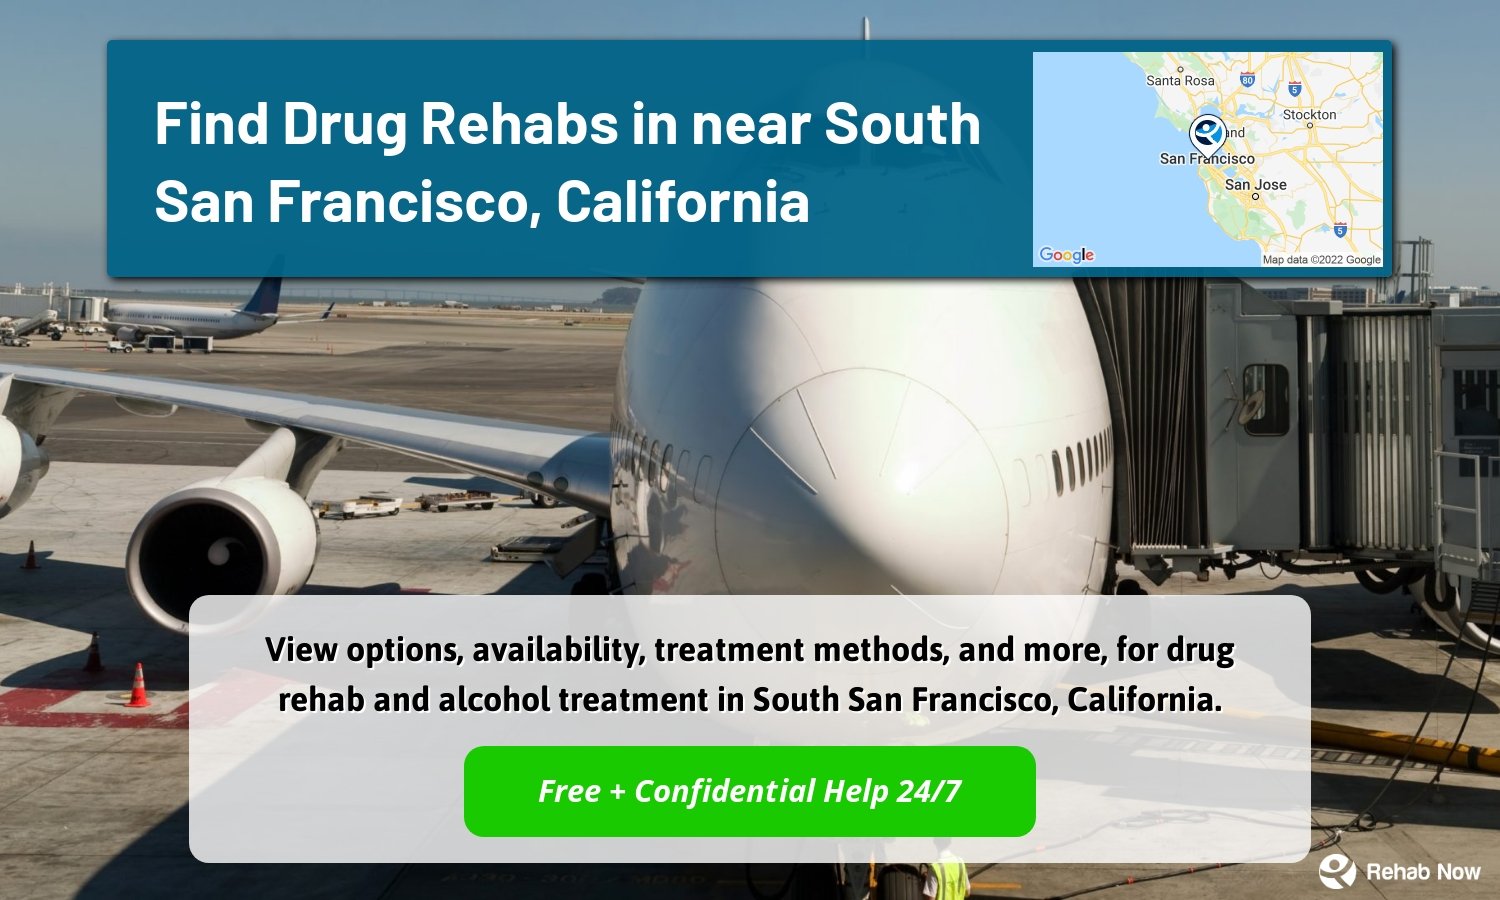 View options, availability, treatment methods, and more, for drug rehab and alcohol treatment in South San Francisco, California.